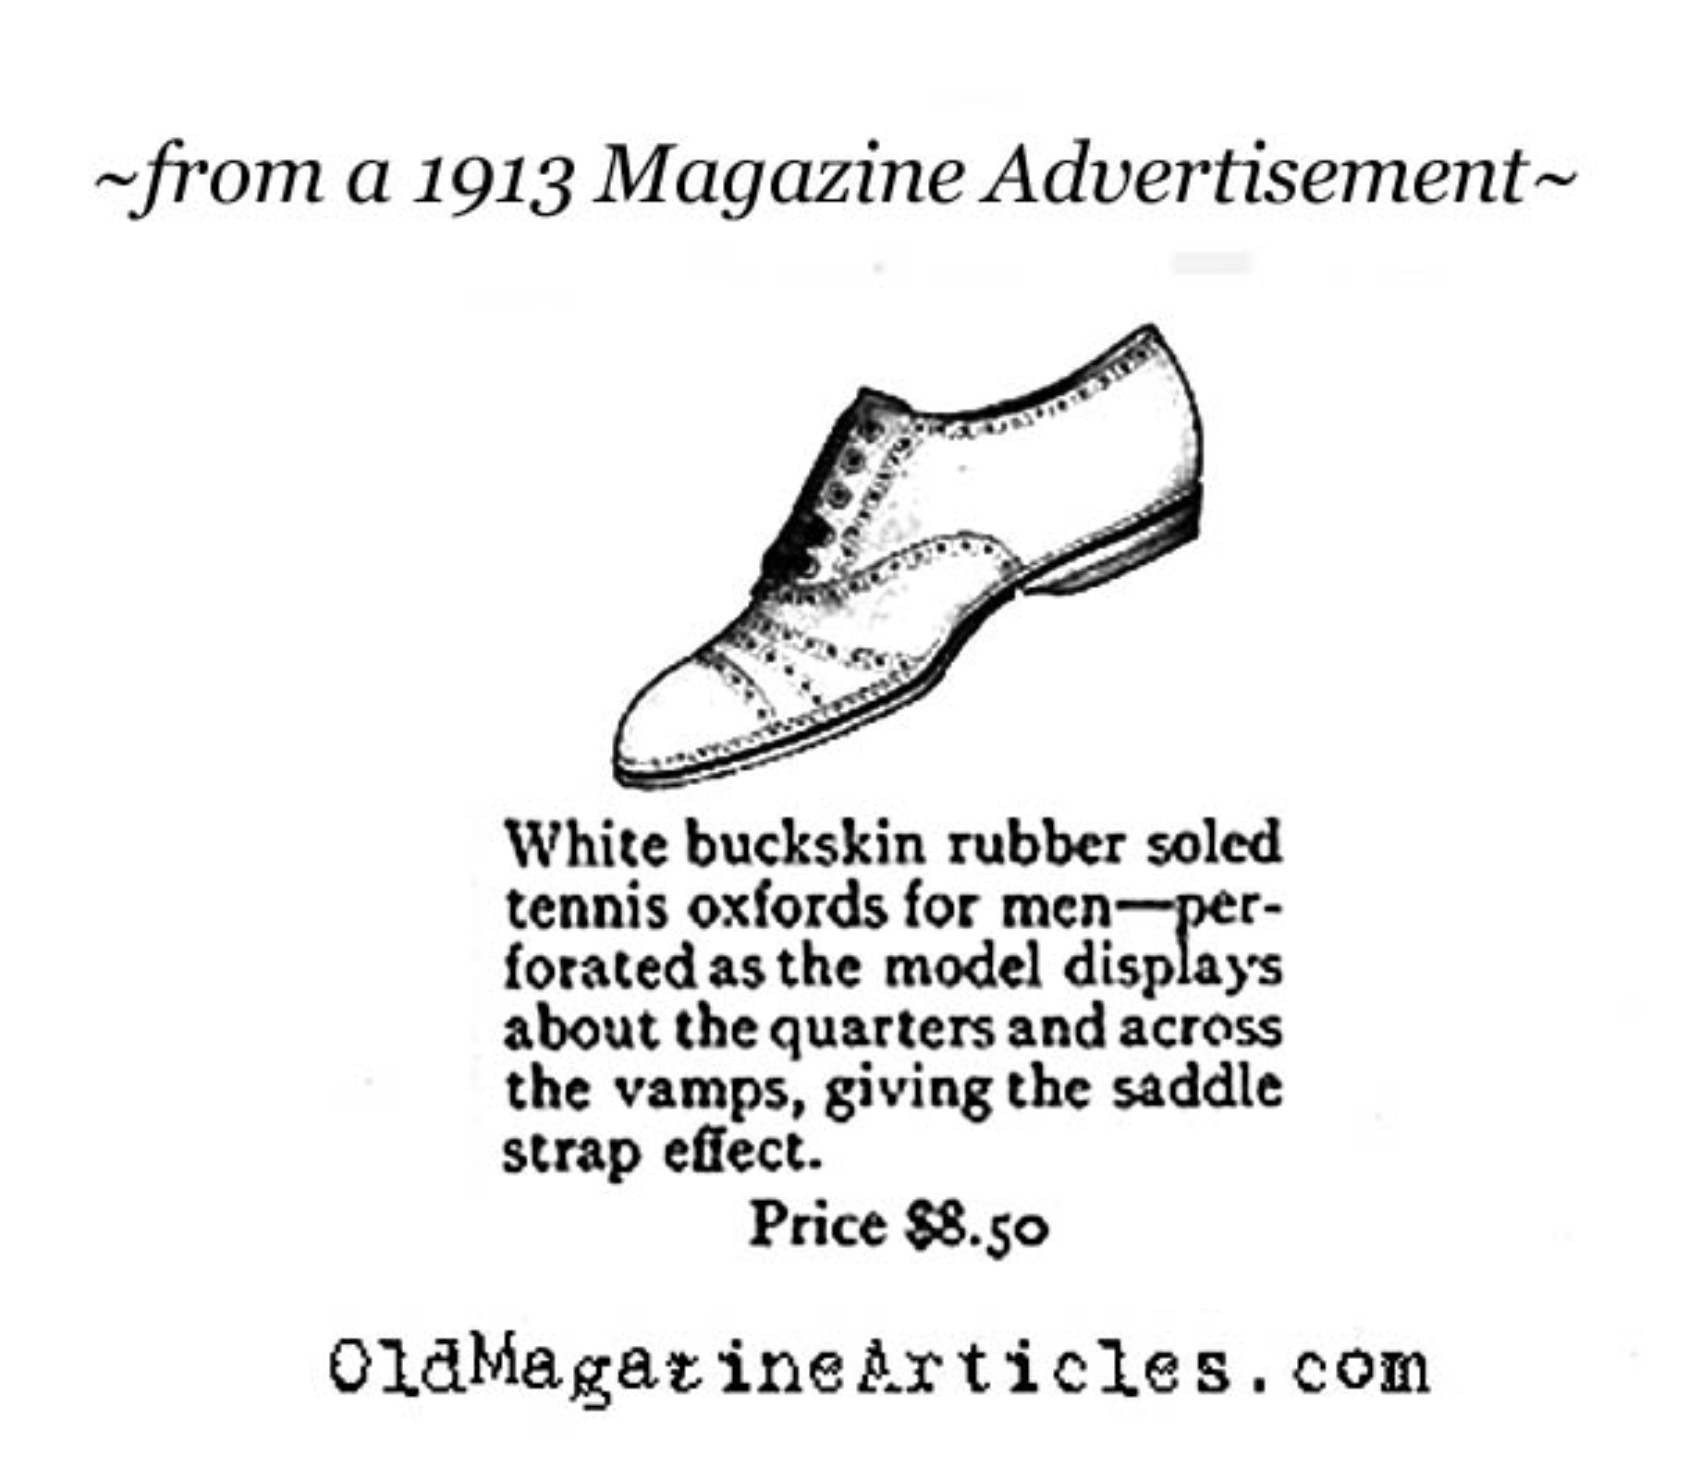 An Early Tennis Shoe (Magazine Ad, 1913)